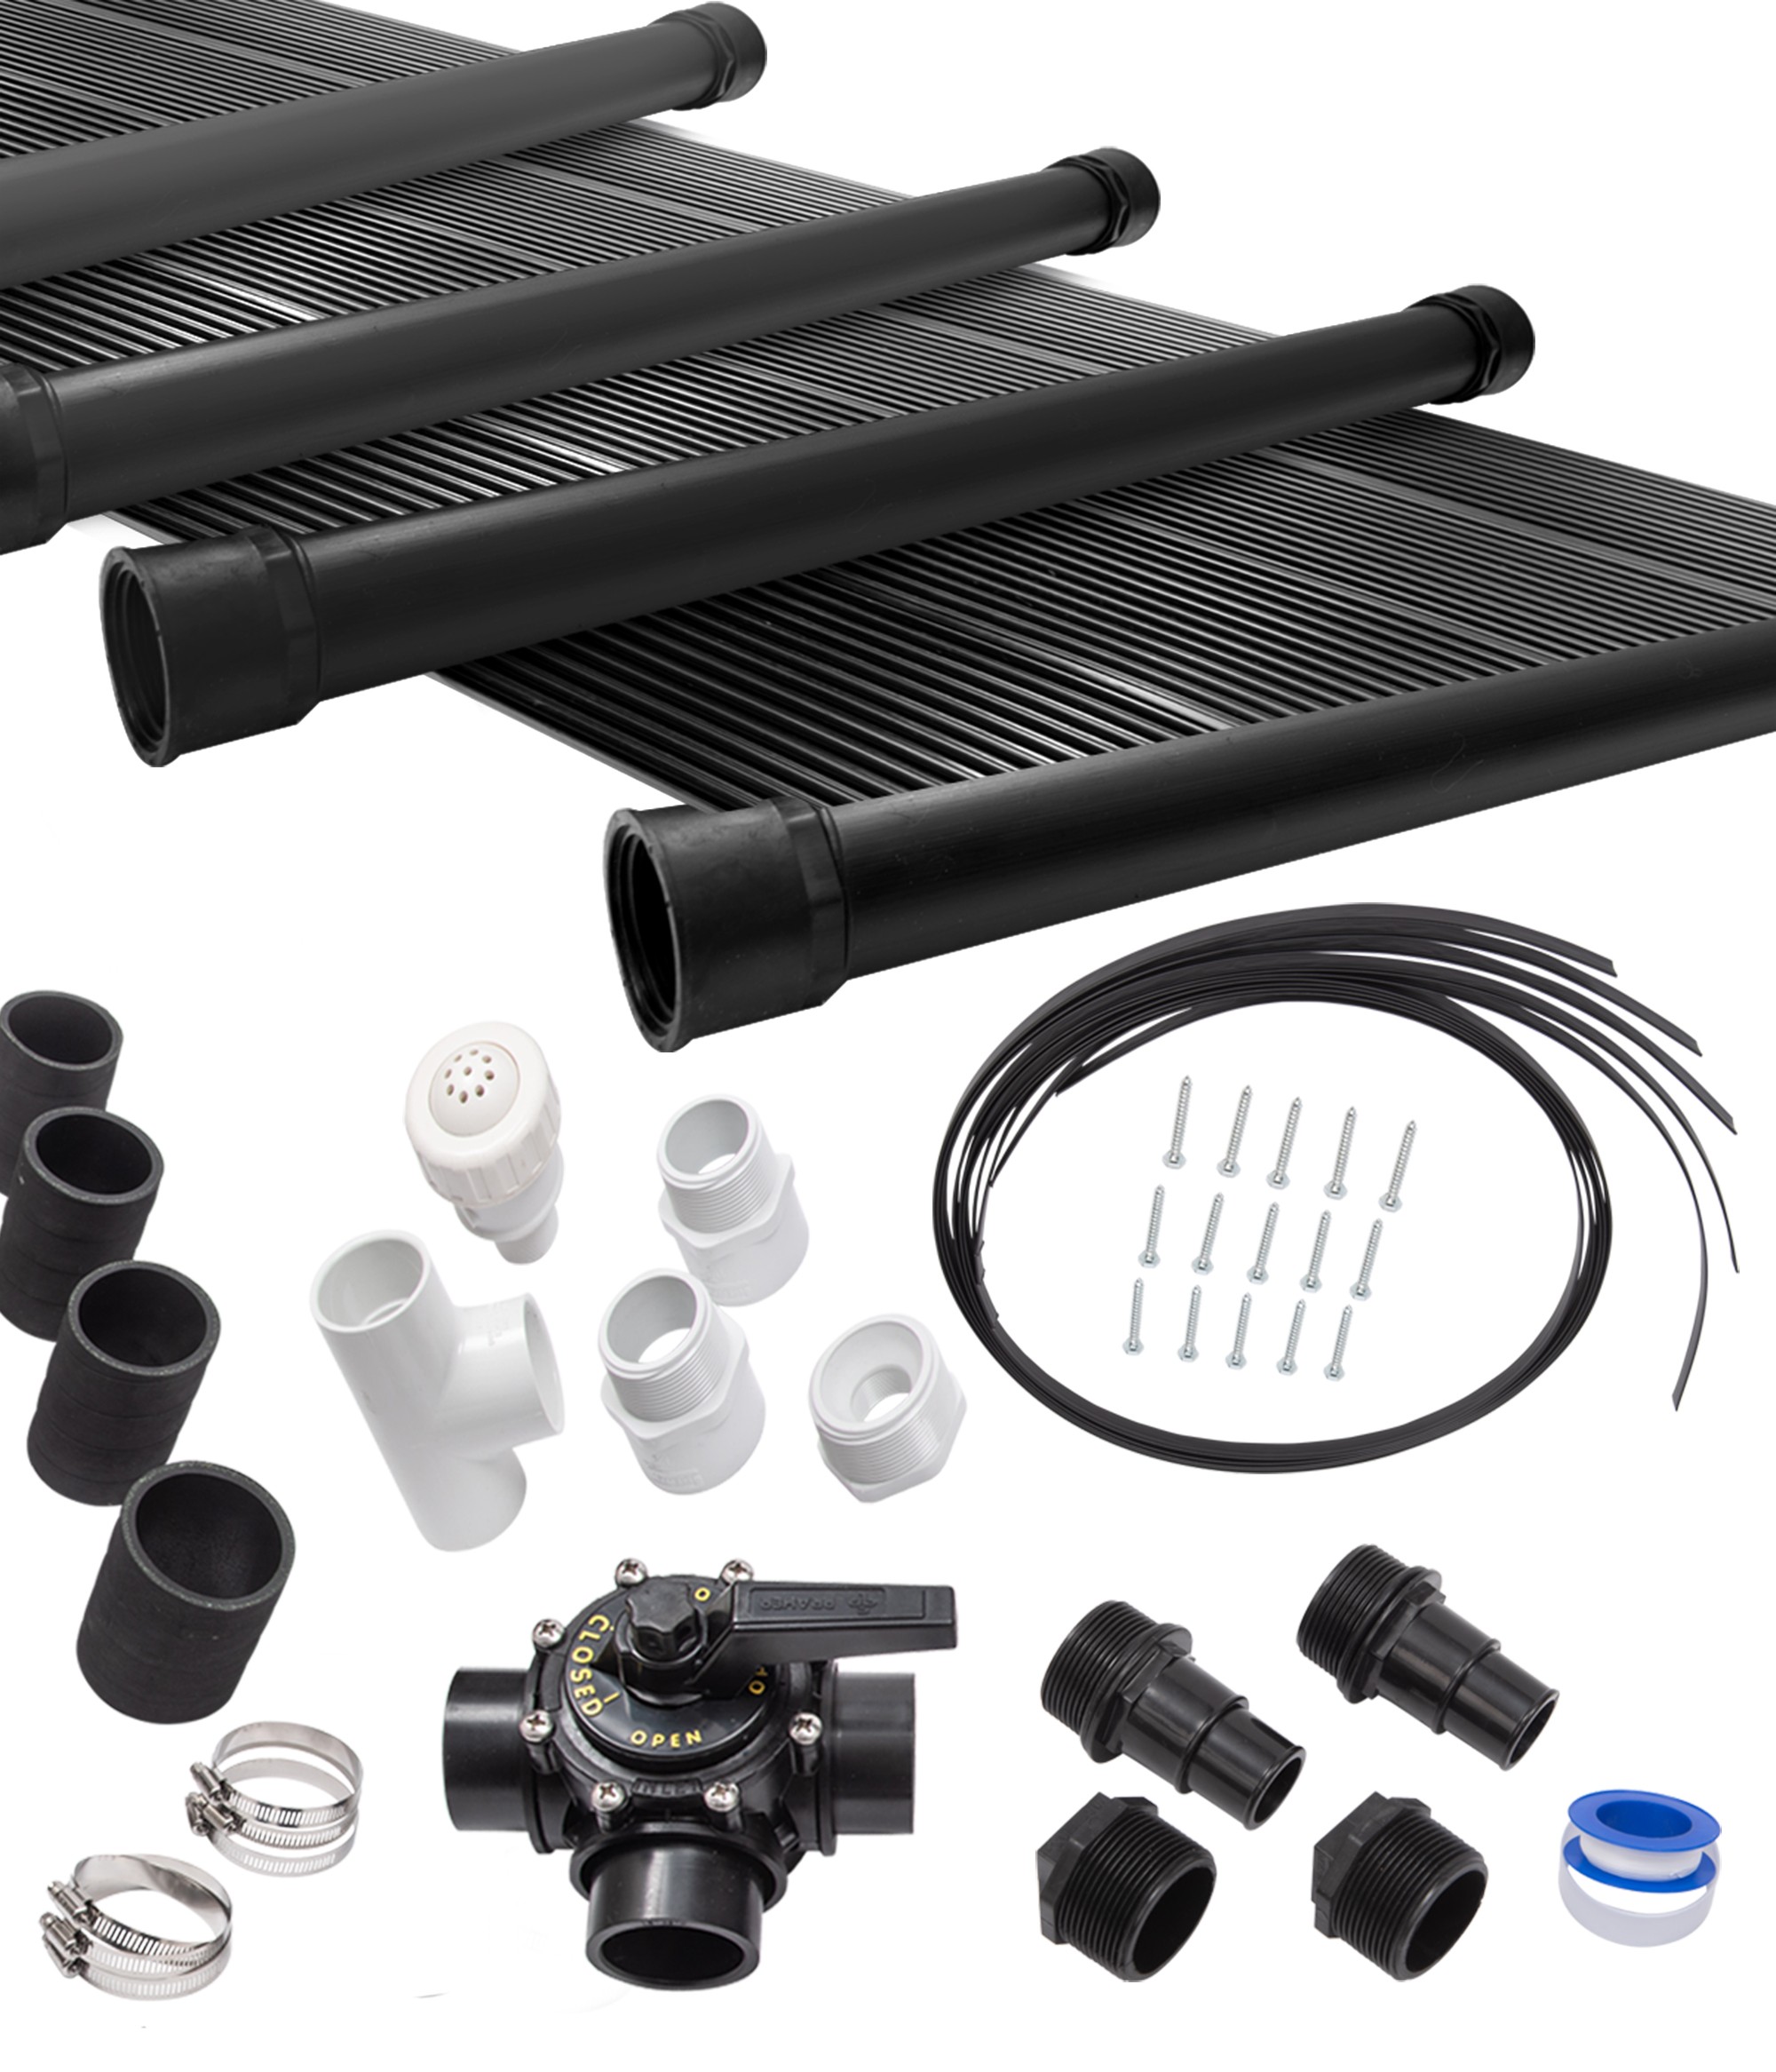 4-2X20' SunQuest Solar Swimming Pool Heater Complete System with Roof Kits